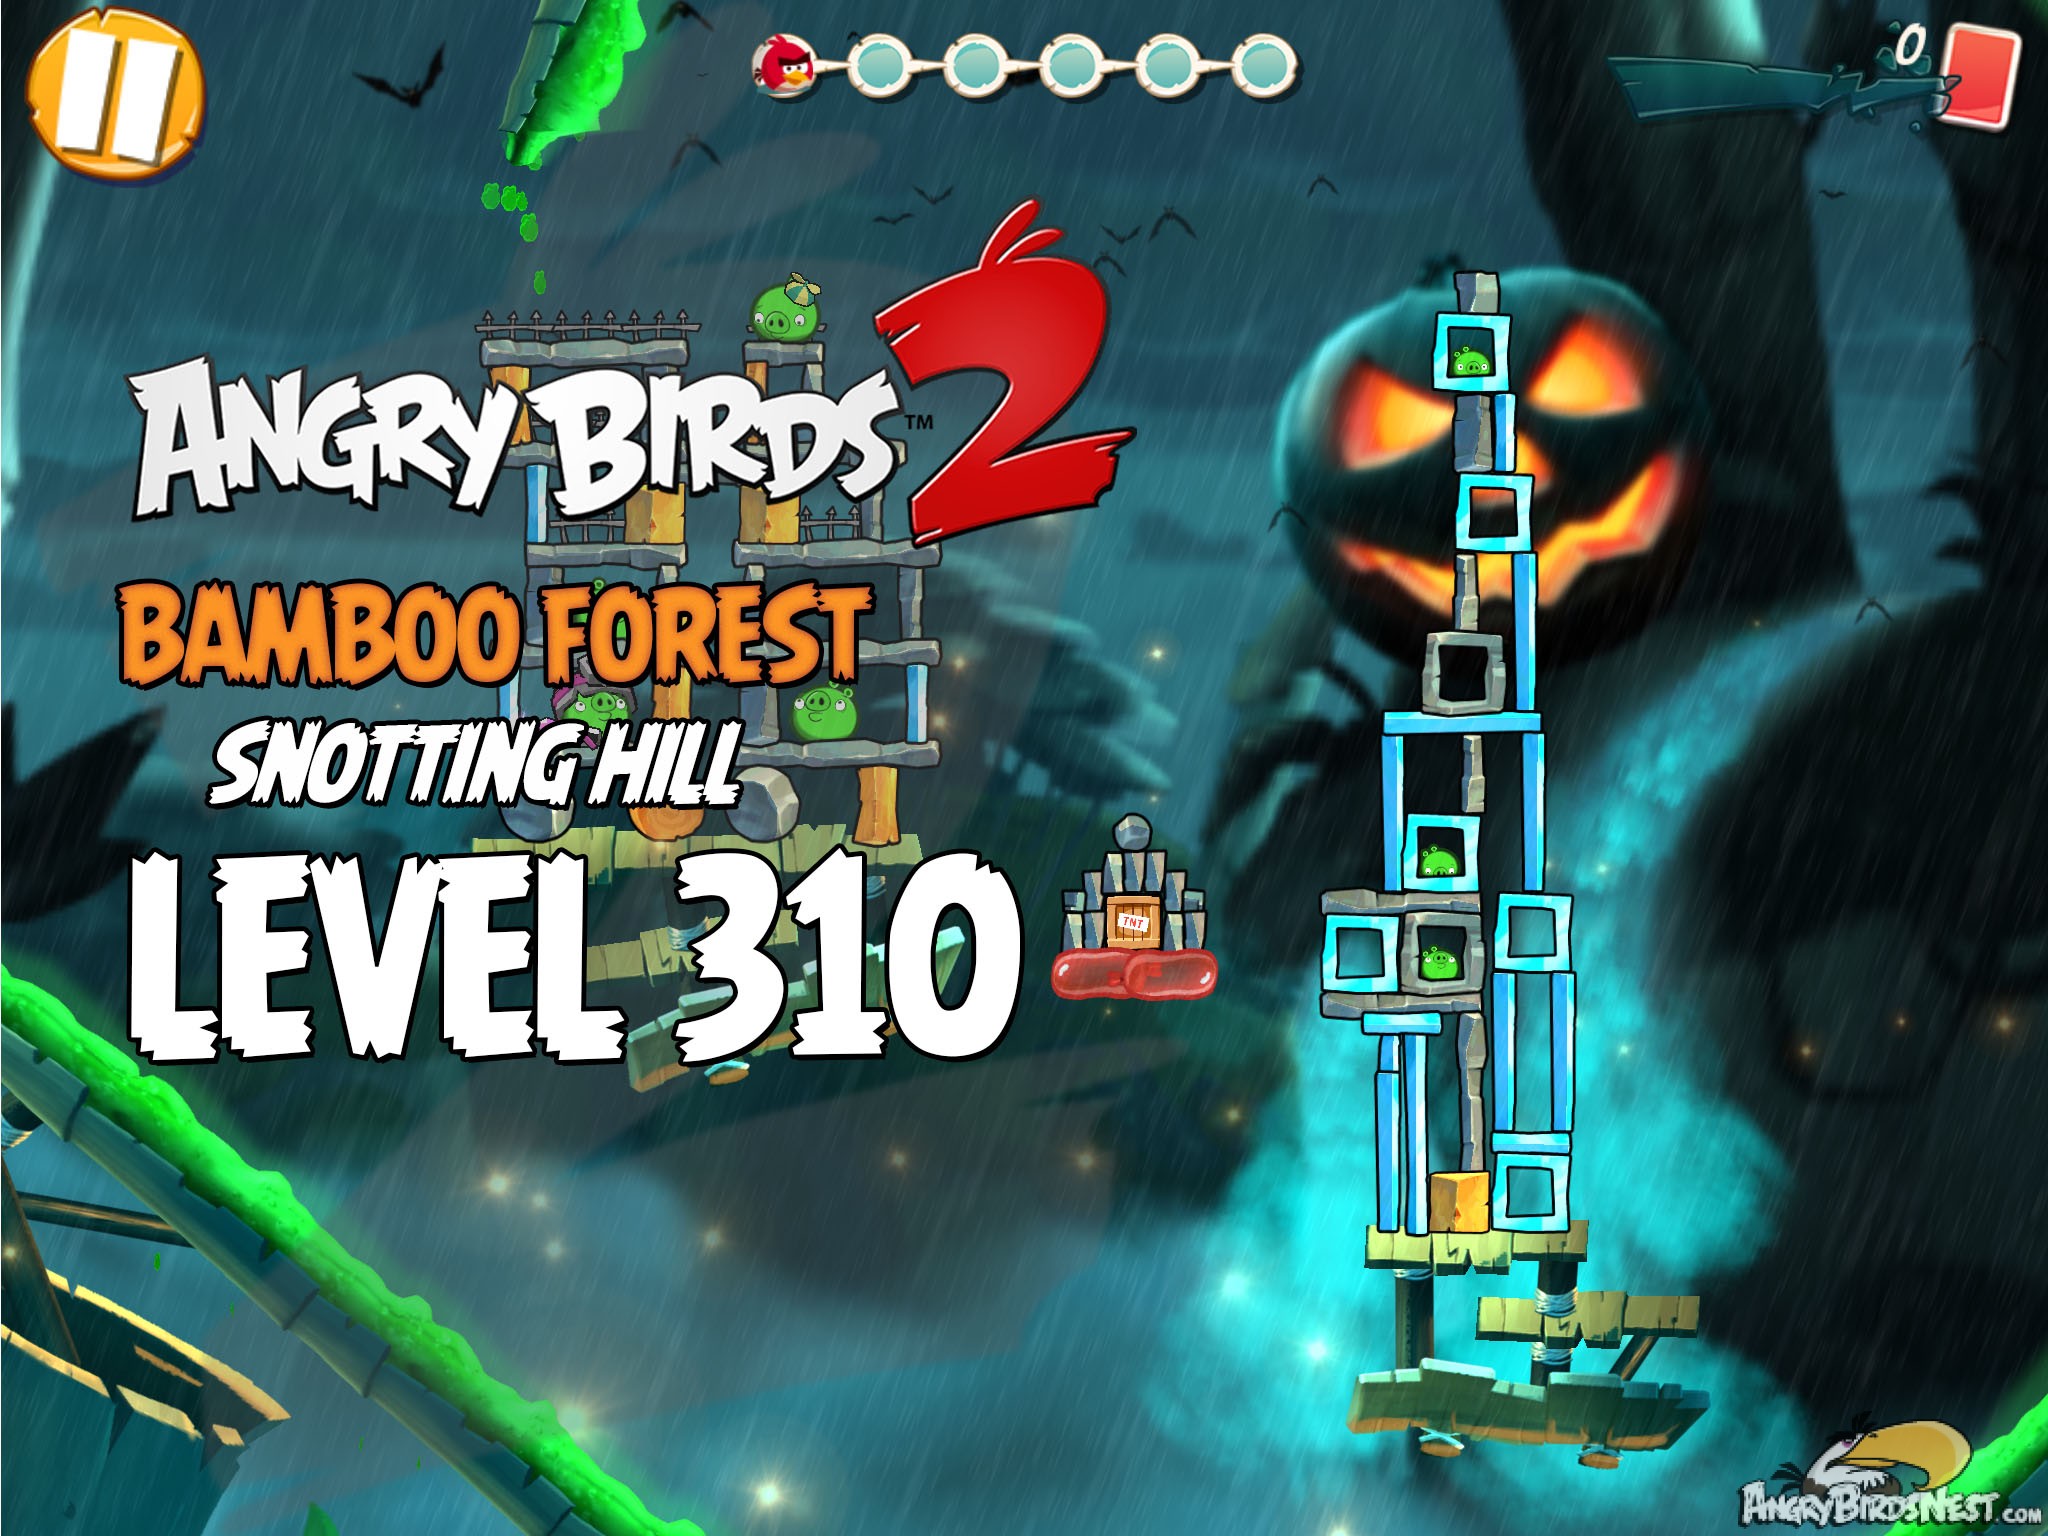 Angry Birds 2 Bamboo Forest Snotting Hill Level 310